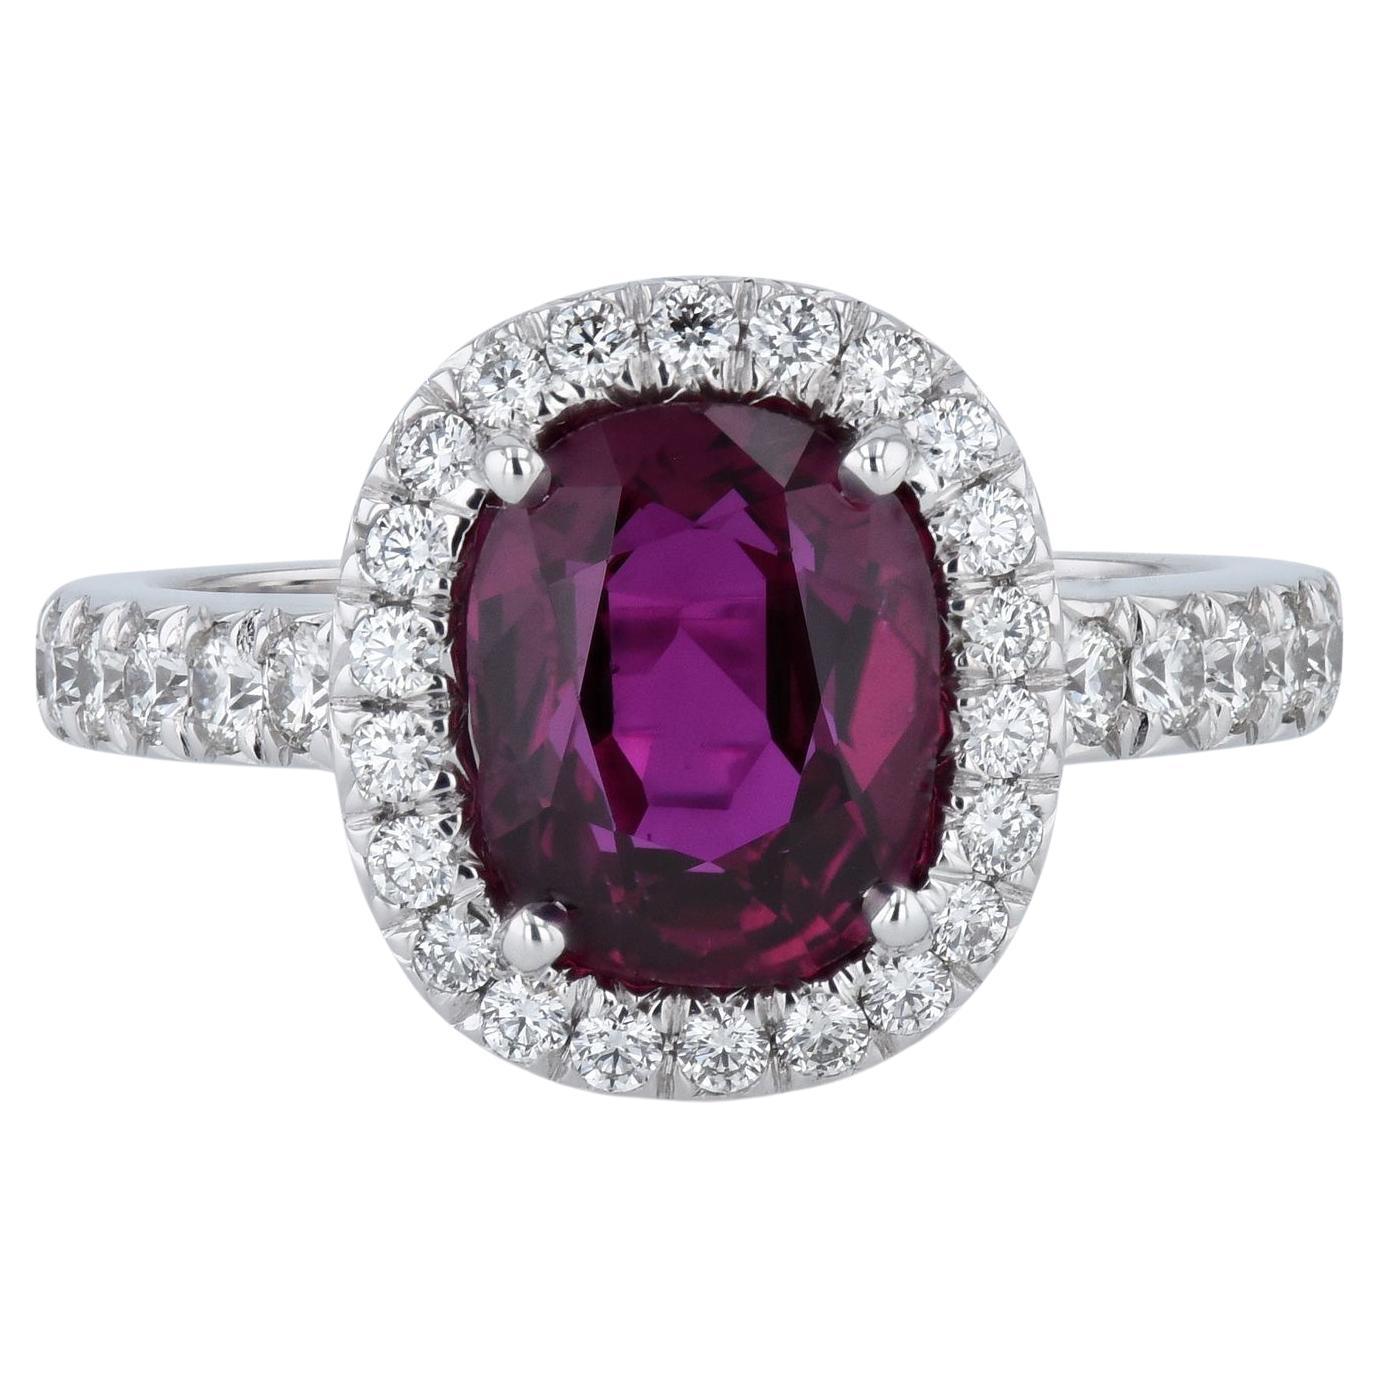 GIA Certified 3.07 Carat Handmade Oval Ruby Pave Diamond White Gold Ring